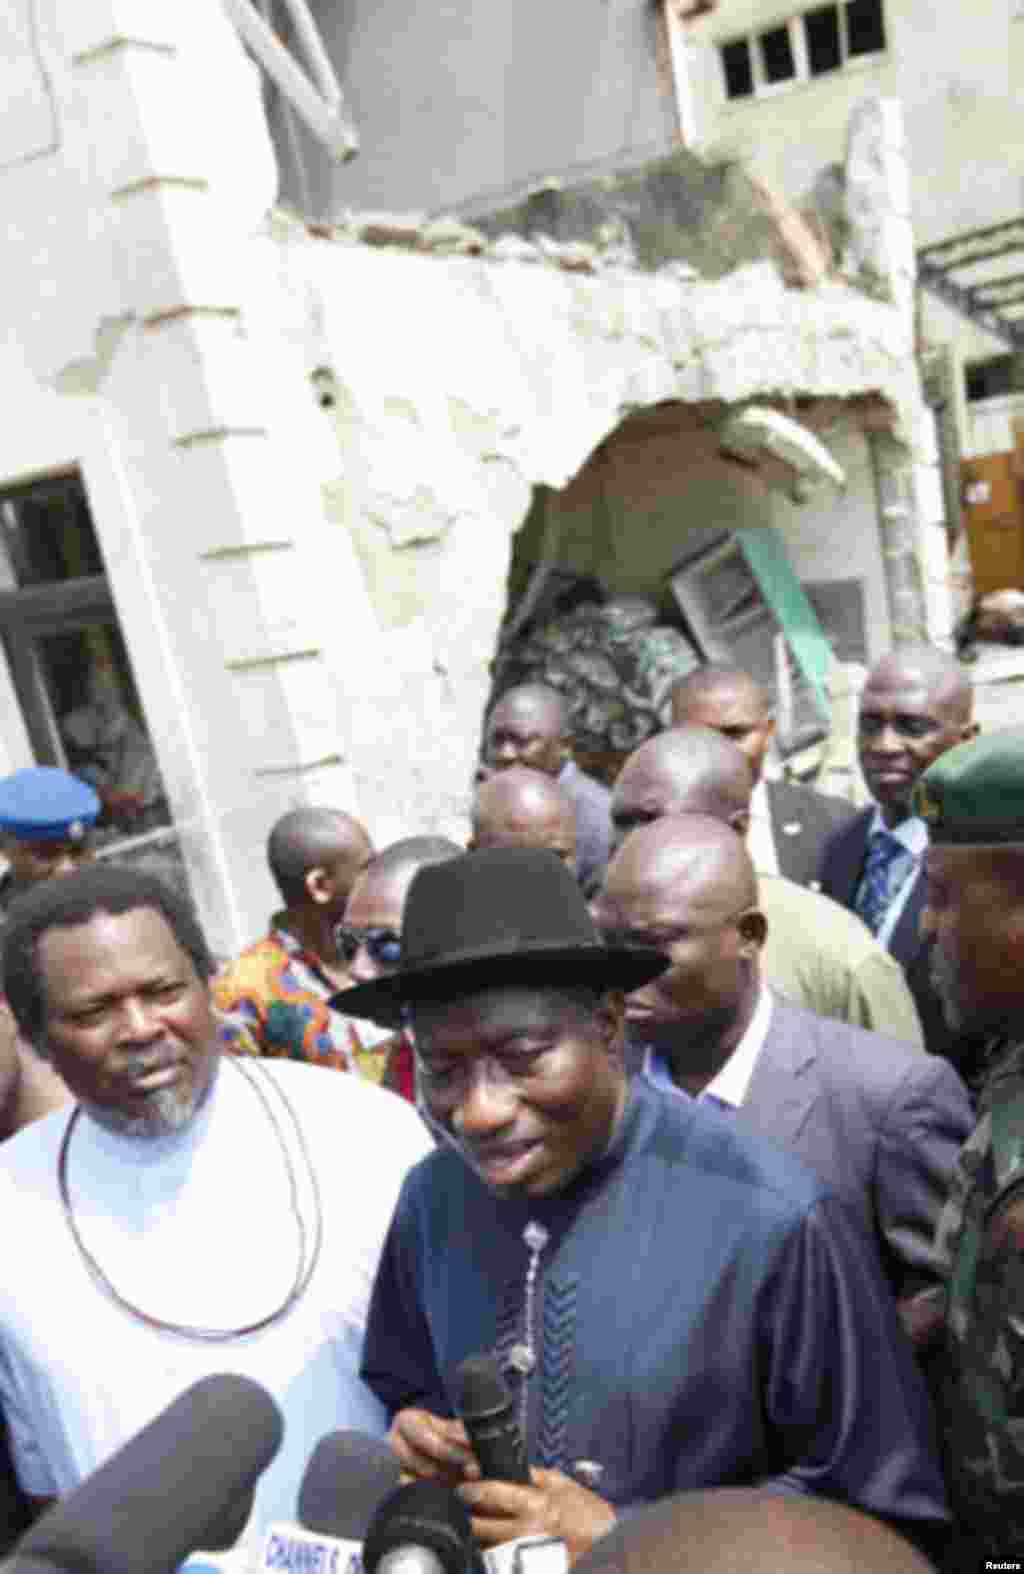 Nigeria's President Goodluck Jonathan (R) stands with This Day's publisher Nduka Obaigbena during a visit to This Day newspaper in Abuja April 28, 2012. Suicide car bombers targeted the offices of Nigerian newspaper This Day in the capital Abuja and north